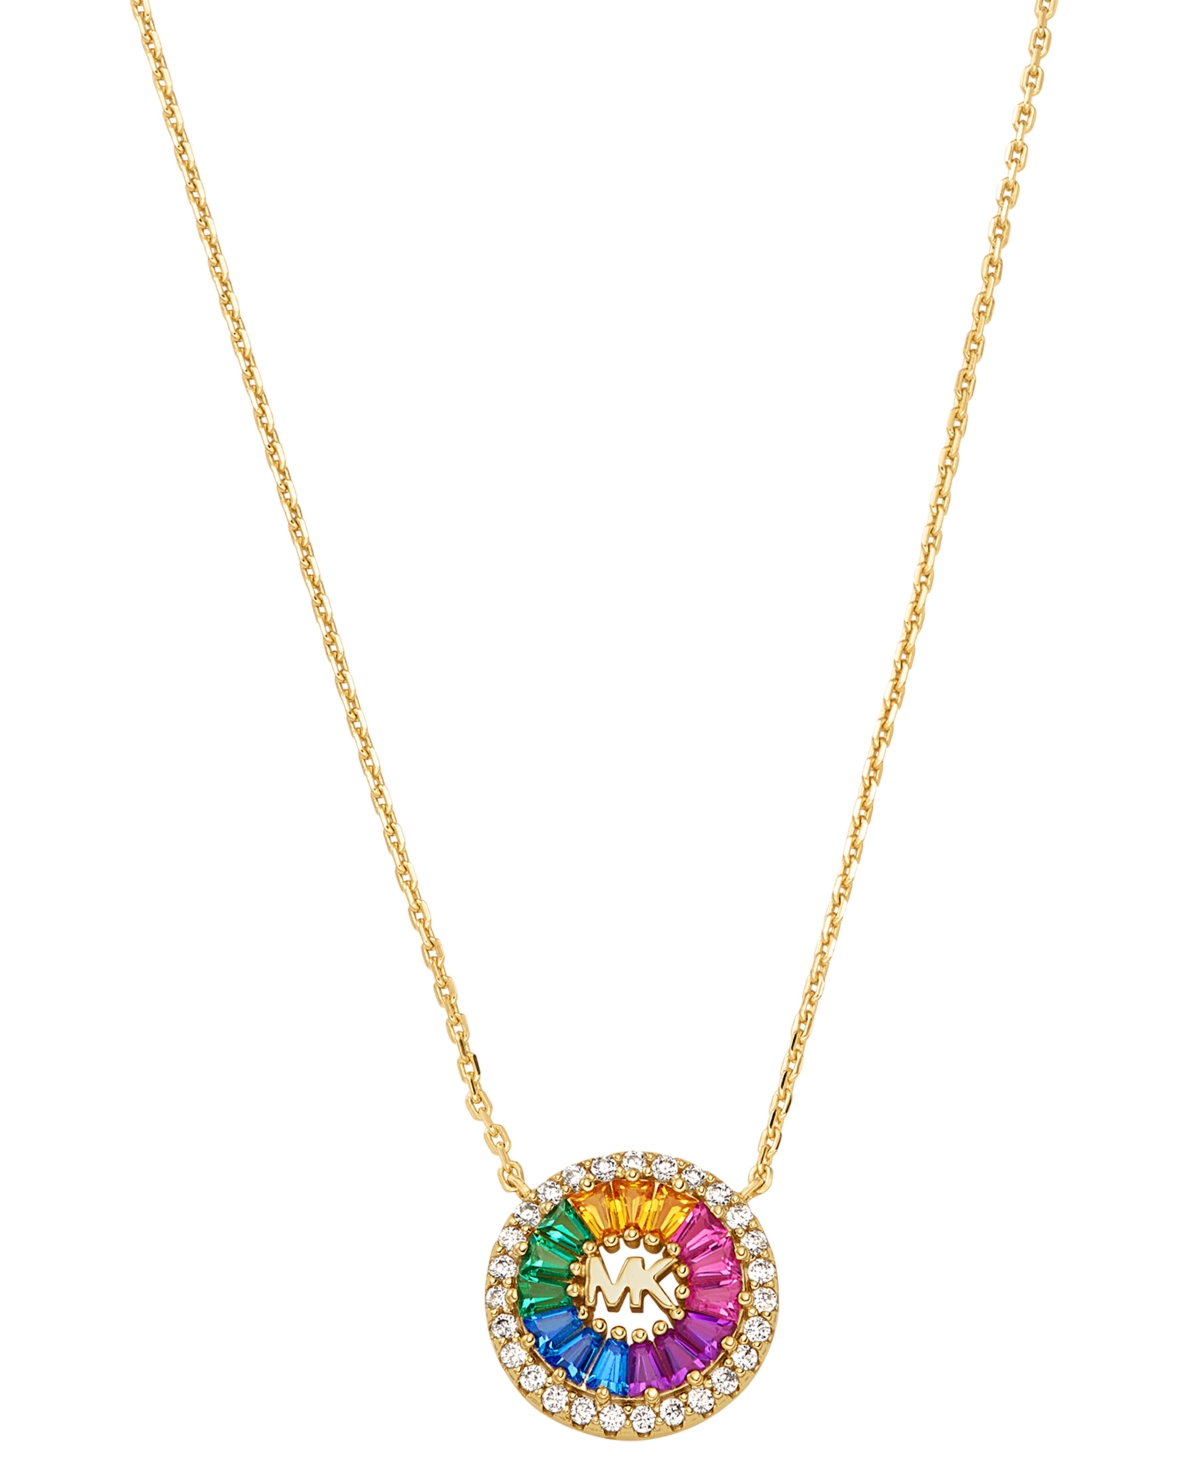 Michael Kors 14k Gold-plated Sterling Silver Rainbow Cubic Zirconia Tapered Baguette And Pave Pendant Necklace